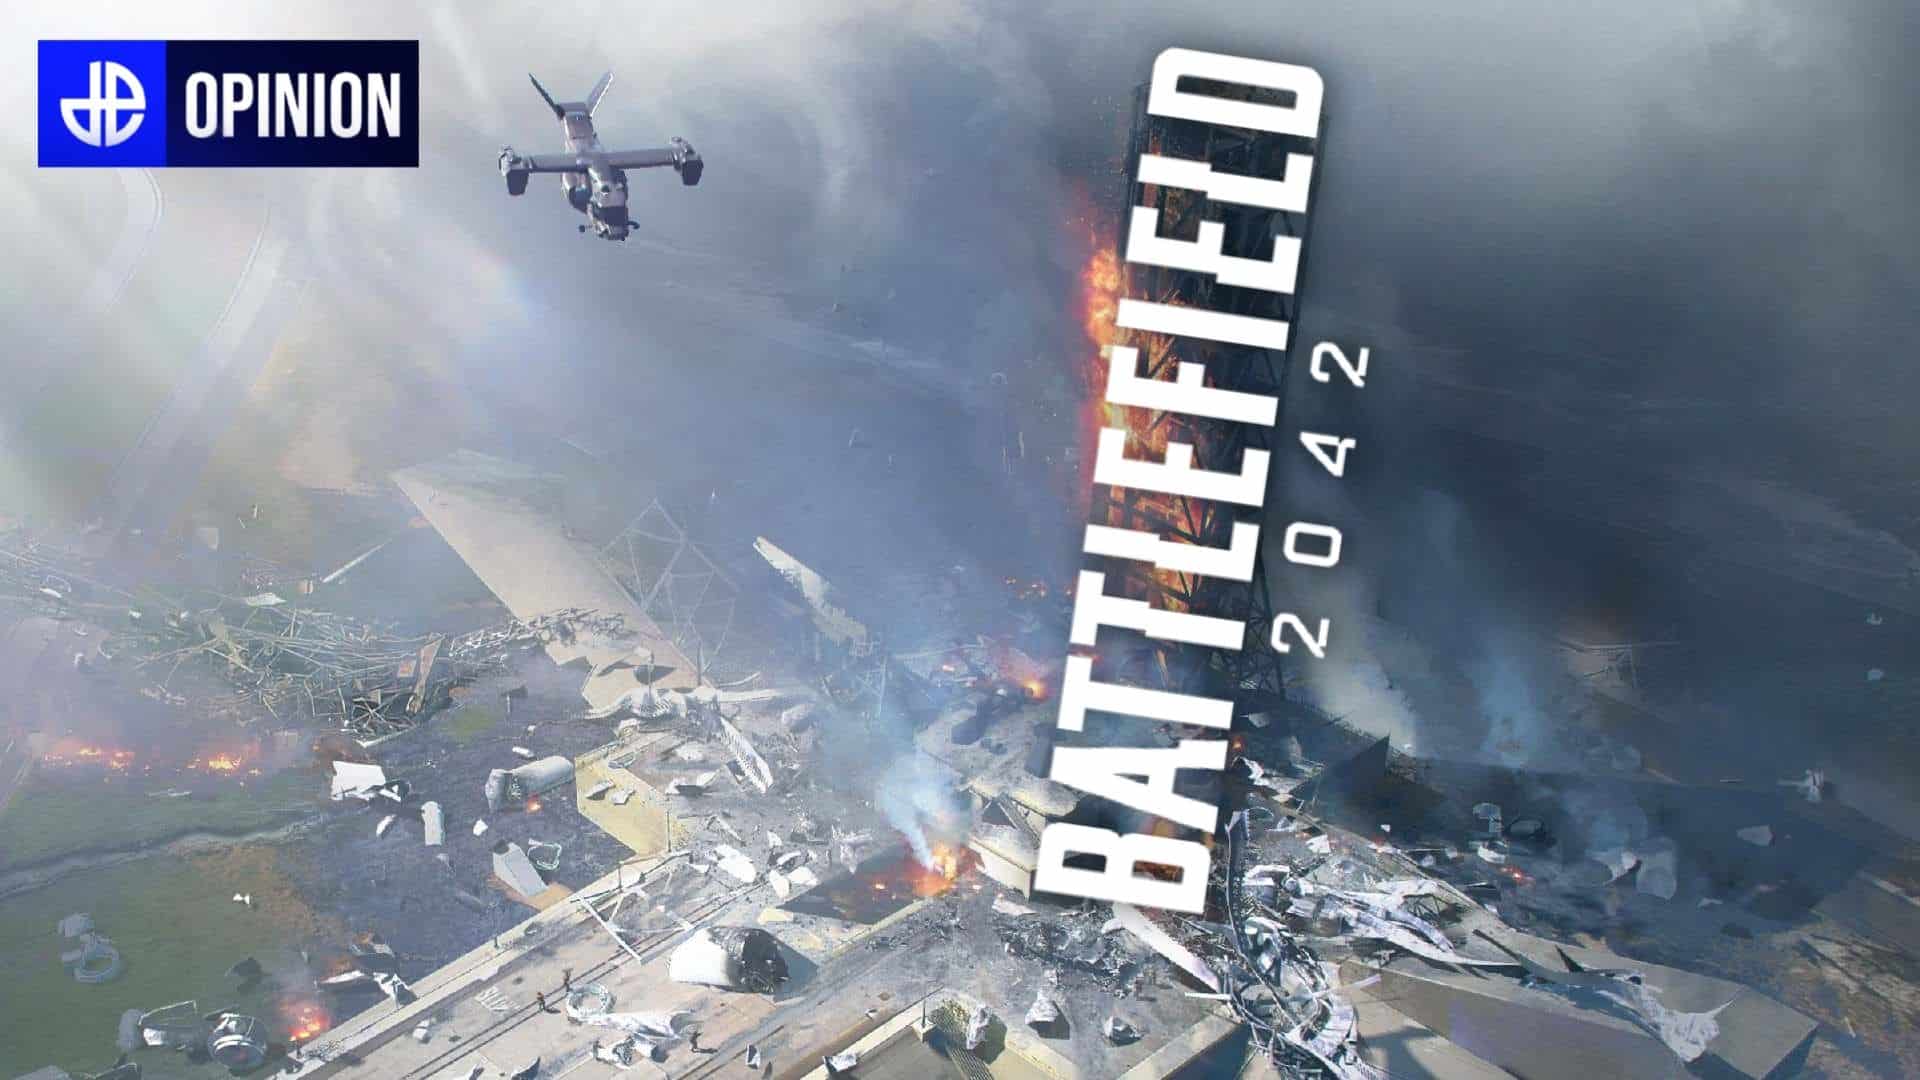 Battlefield 2042 already lost more than ⅔ of its (steam)playerbase not even  2 weeks after launch